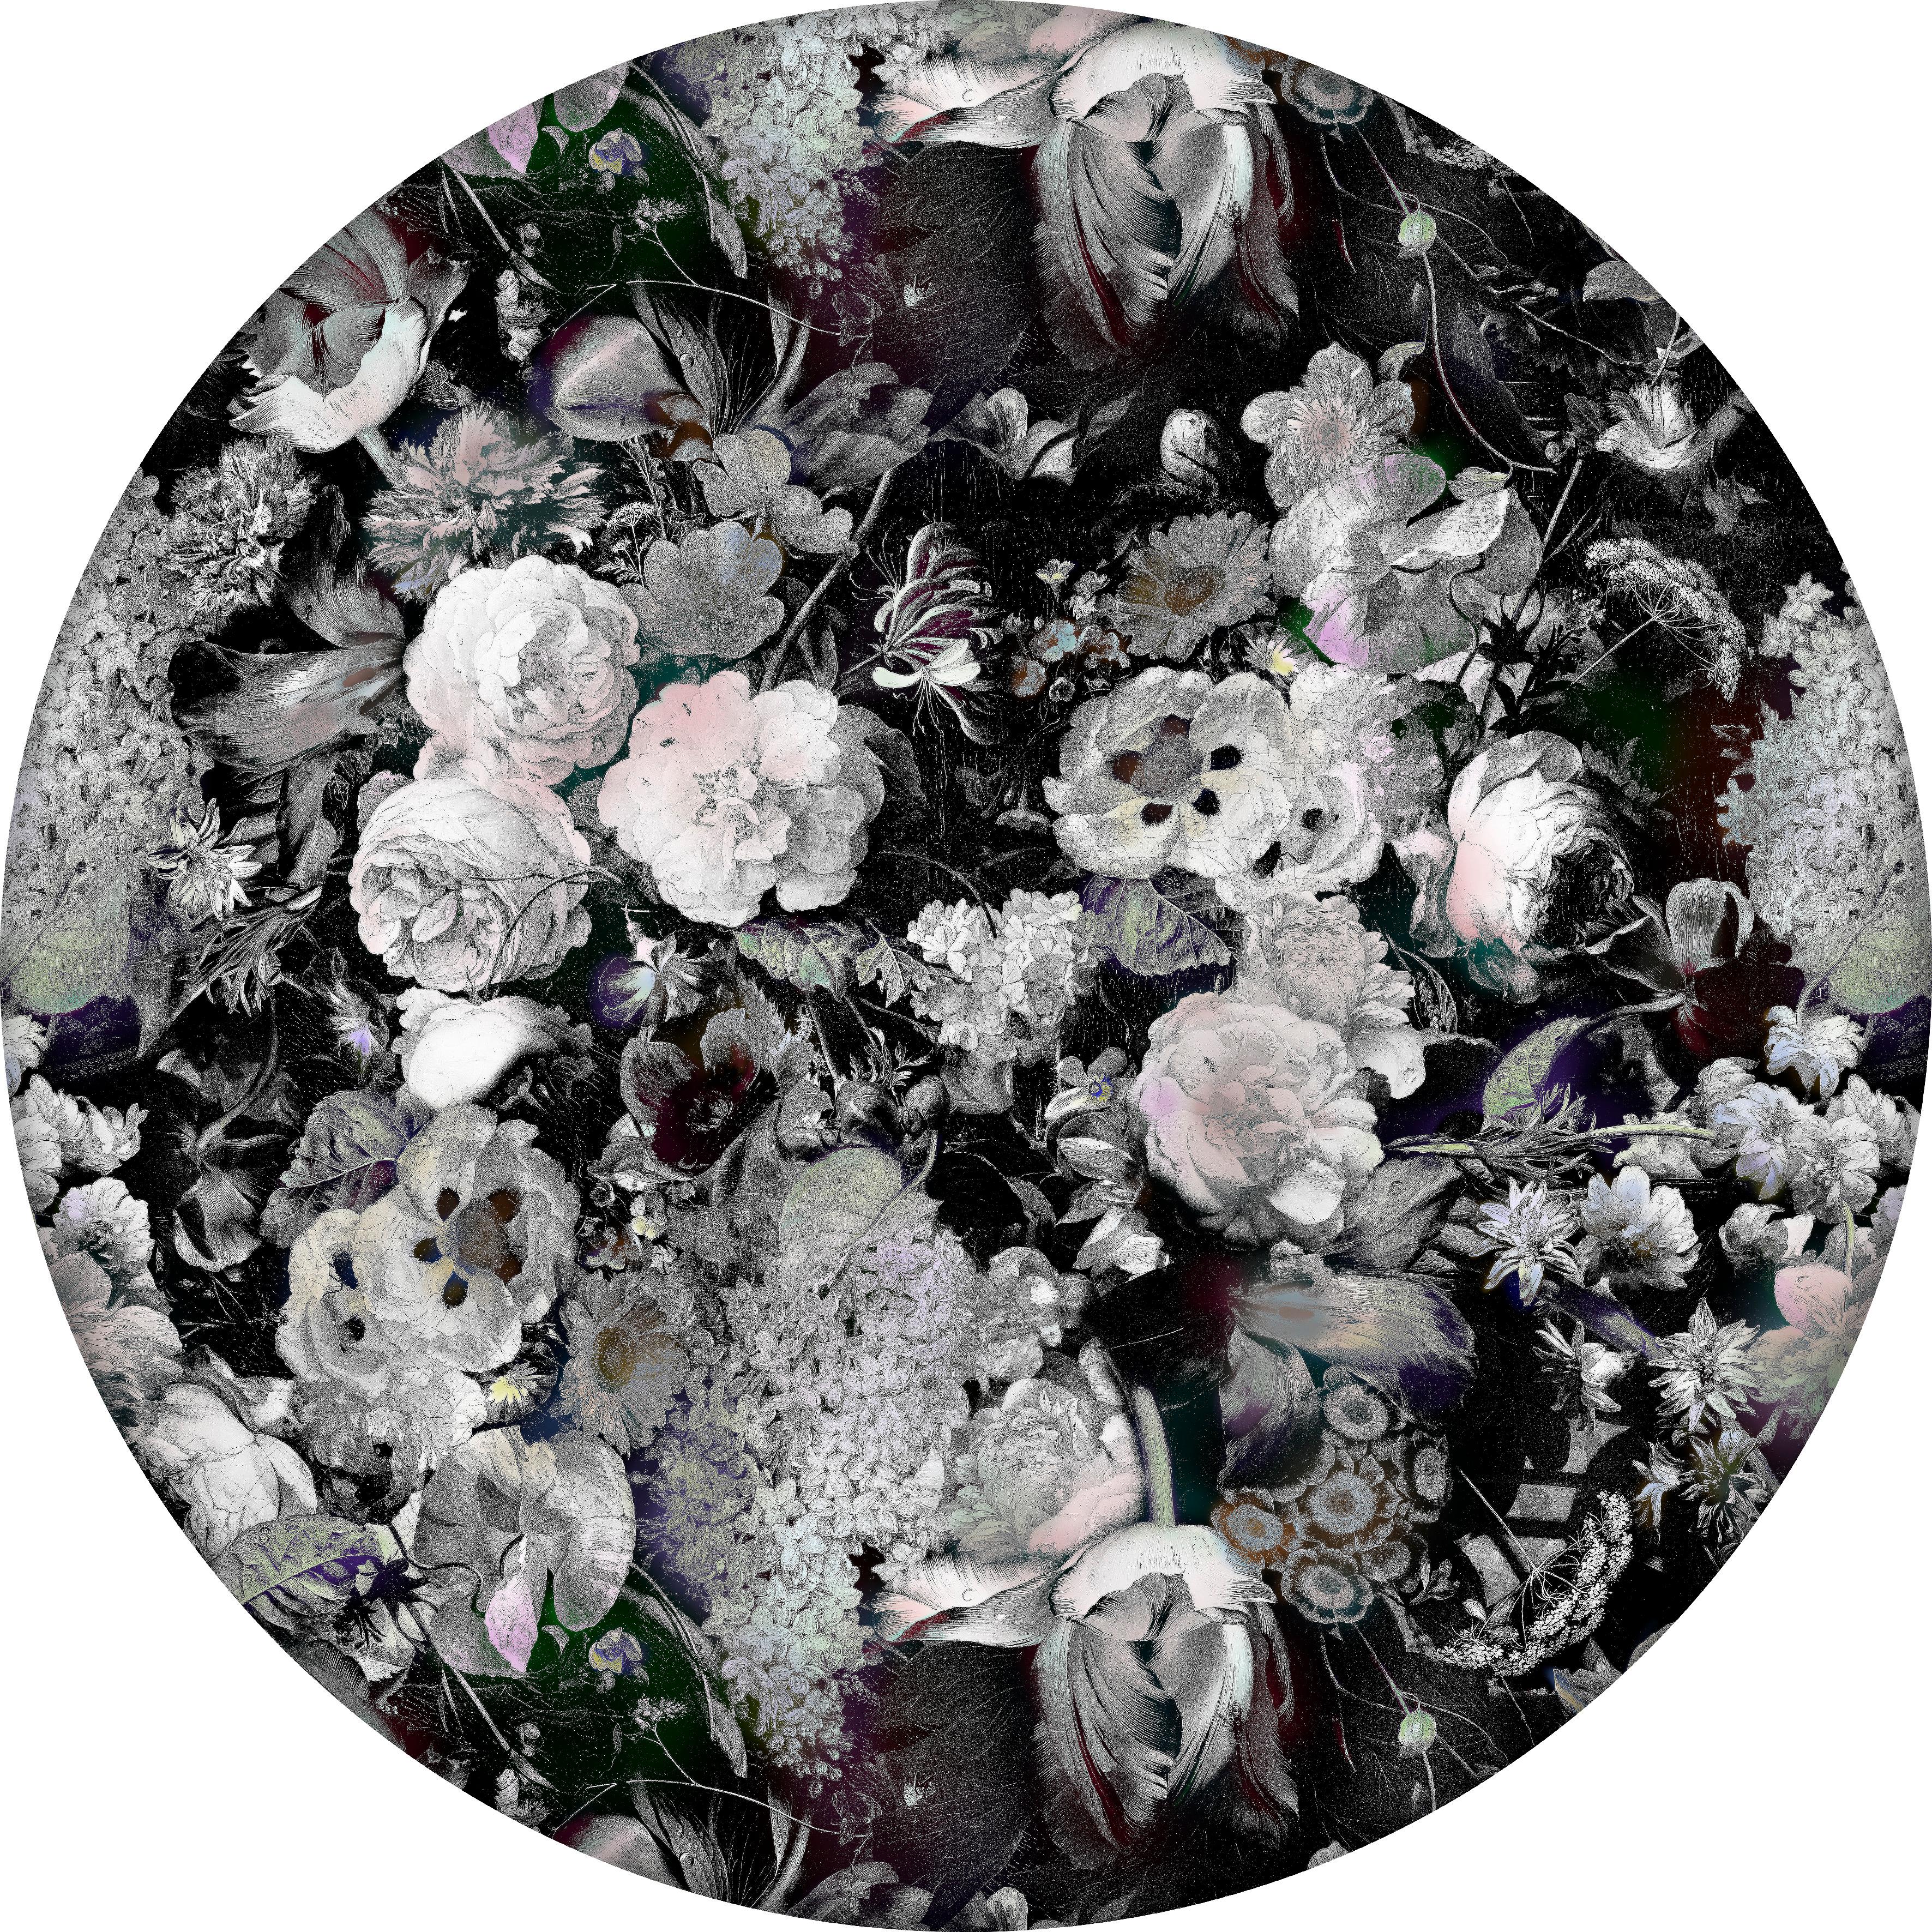 Moooi large Eden Queen B&W round rug in low pile Polyamide

Marcel Wanders studio is a leading product and interior design studio located in the creative capital of Amsterdam. The studio has over 1,900 + iconic product and interior design